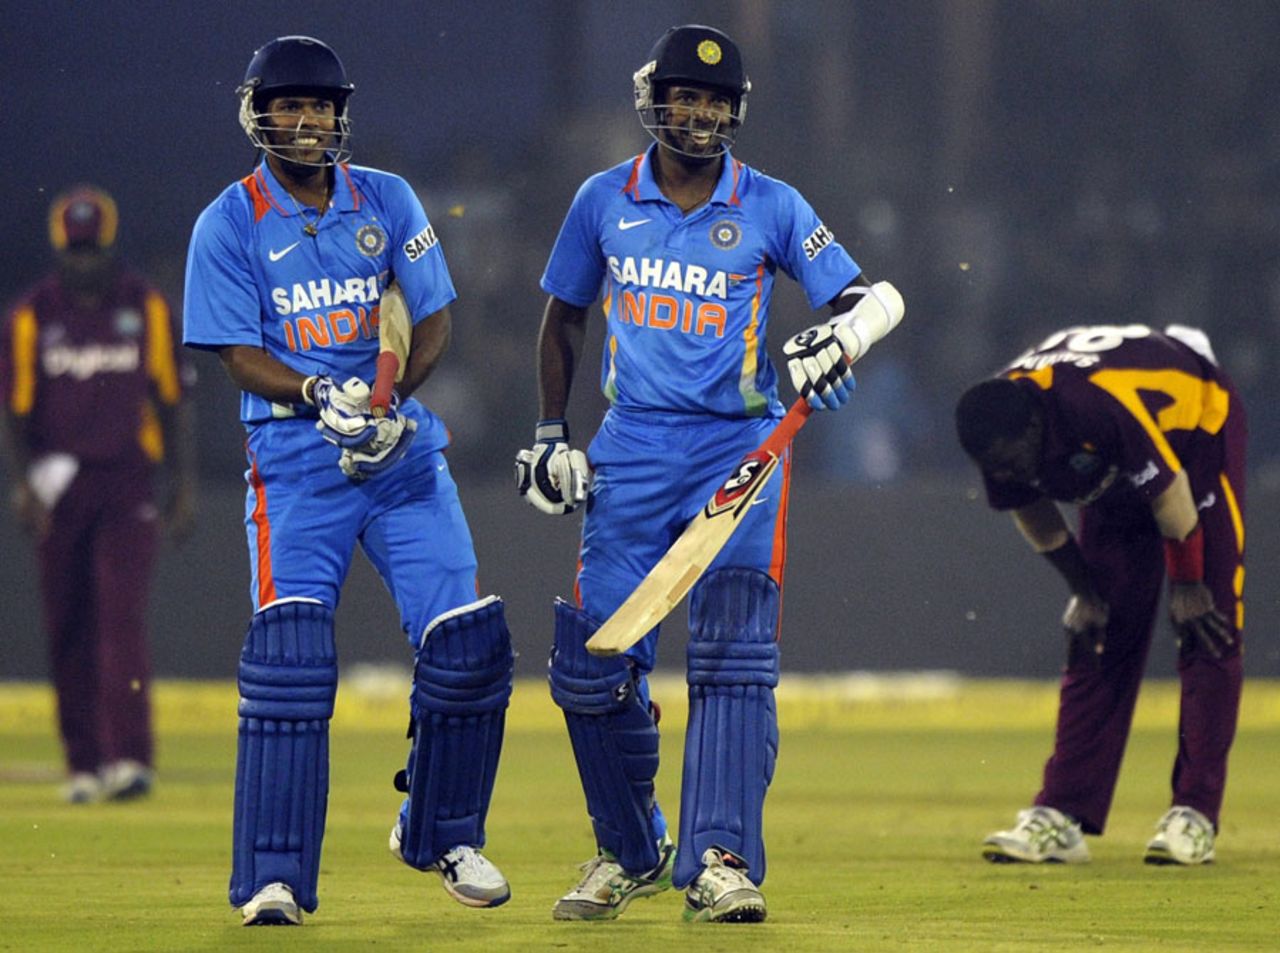 Umesh Yadav and Varun Aaron held their nerve at the death, India v West Indies, 1st ODI, Cuttack, November 29, 2011